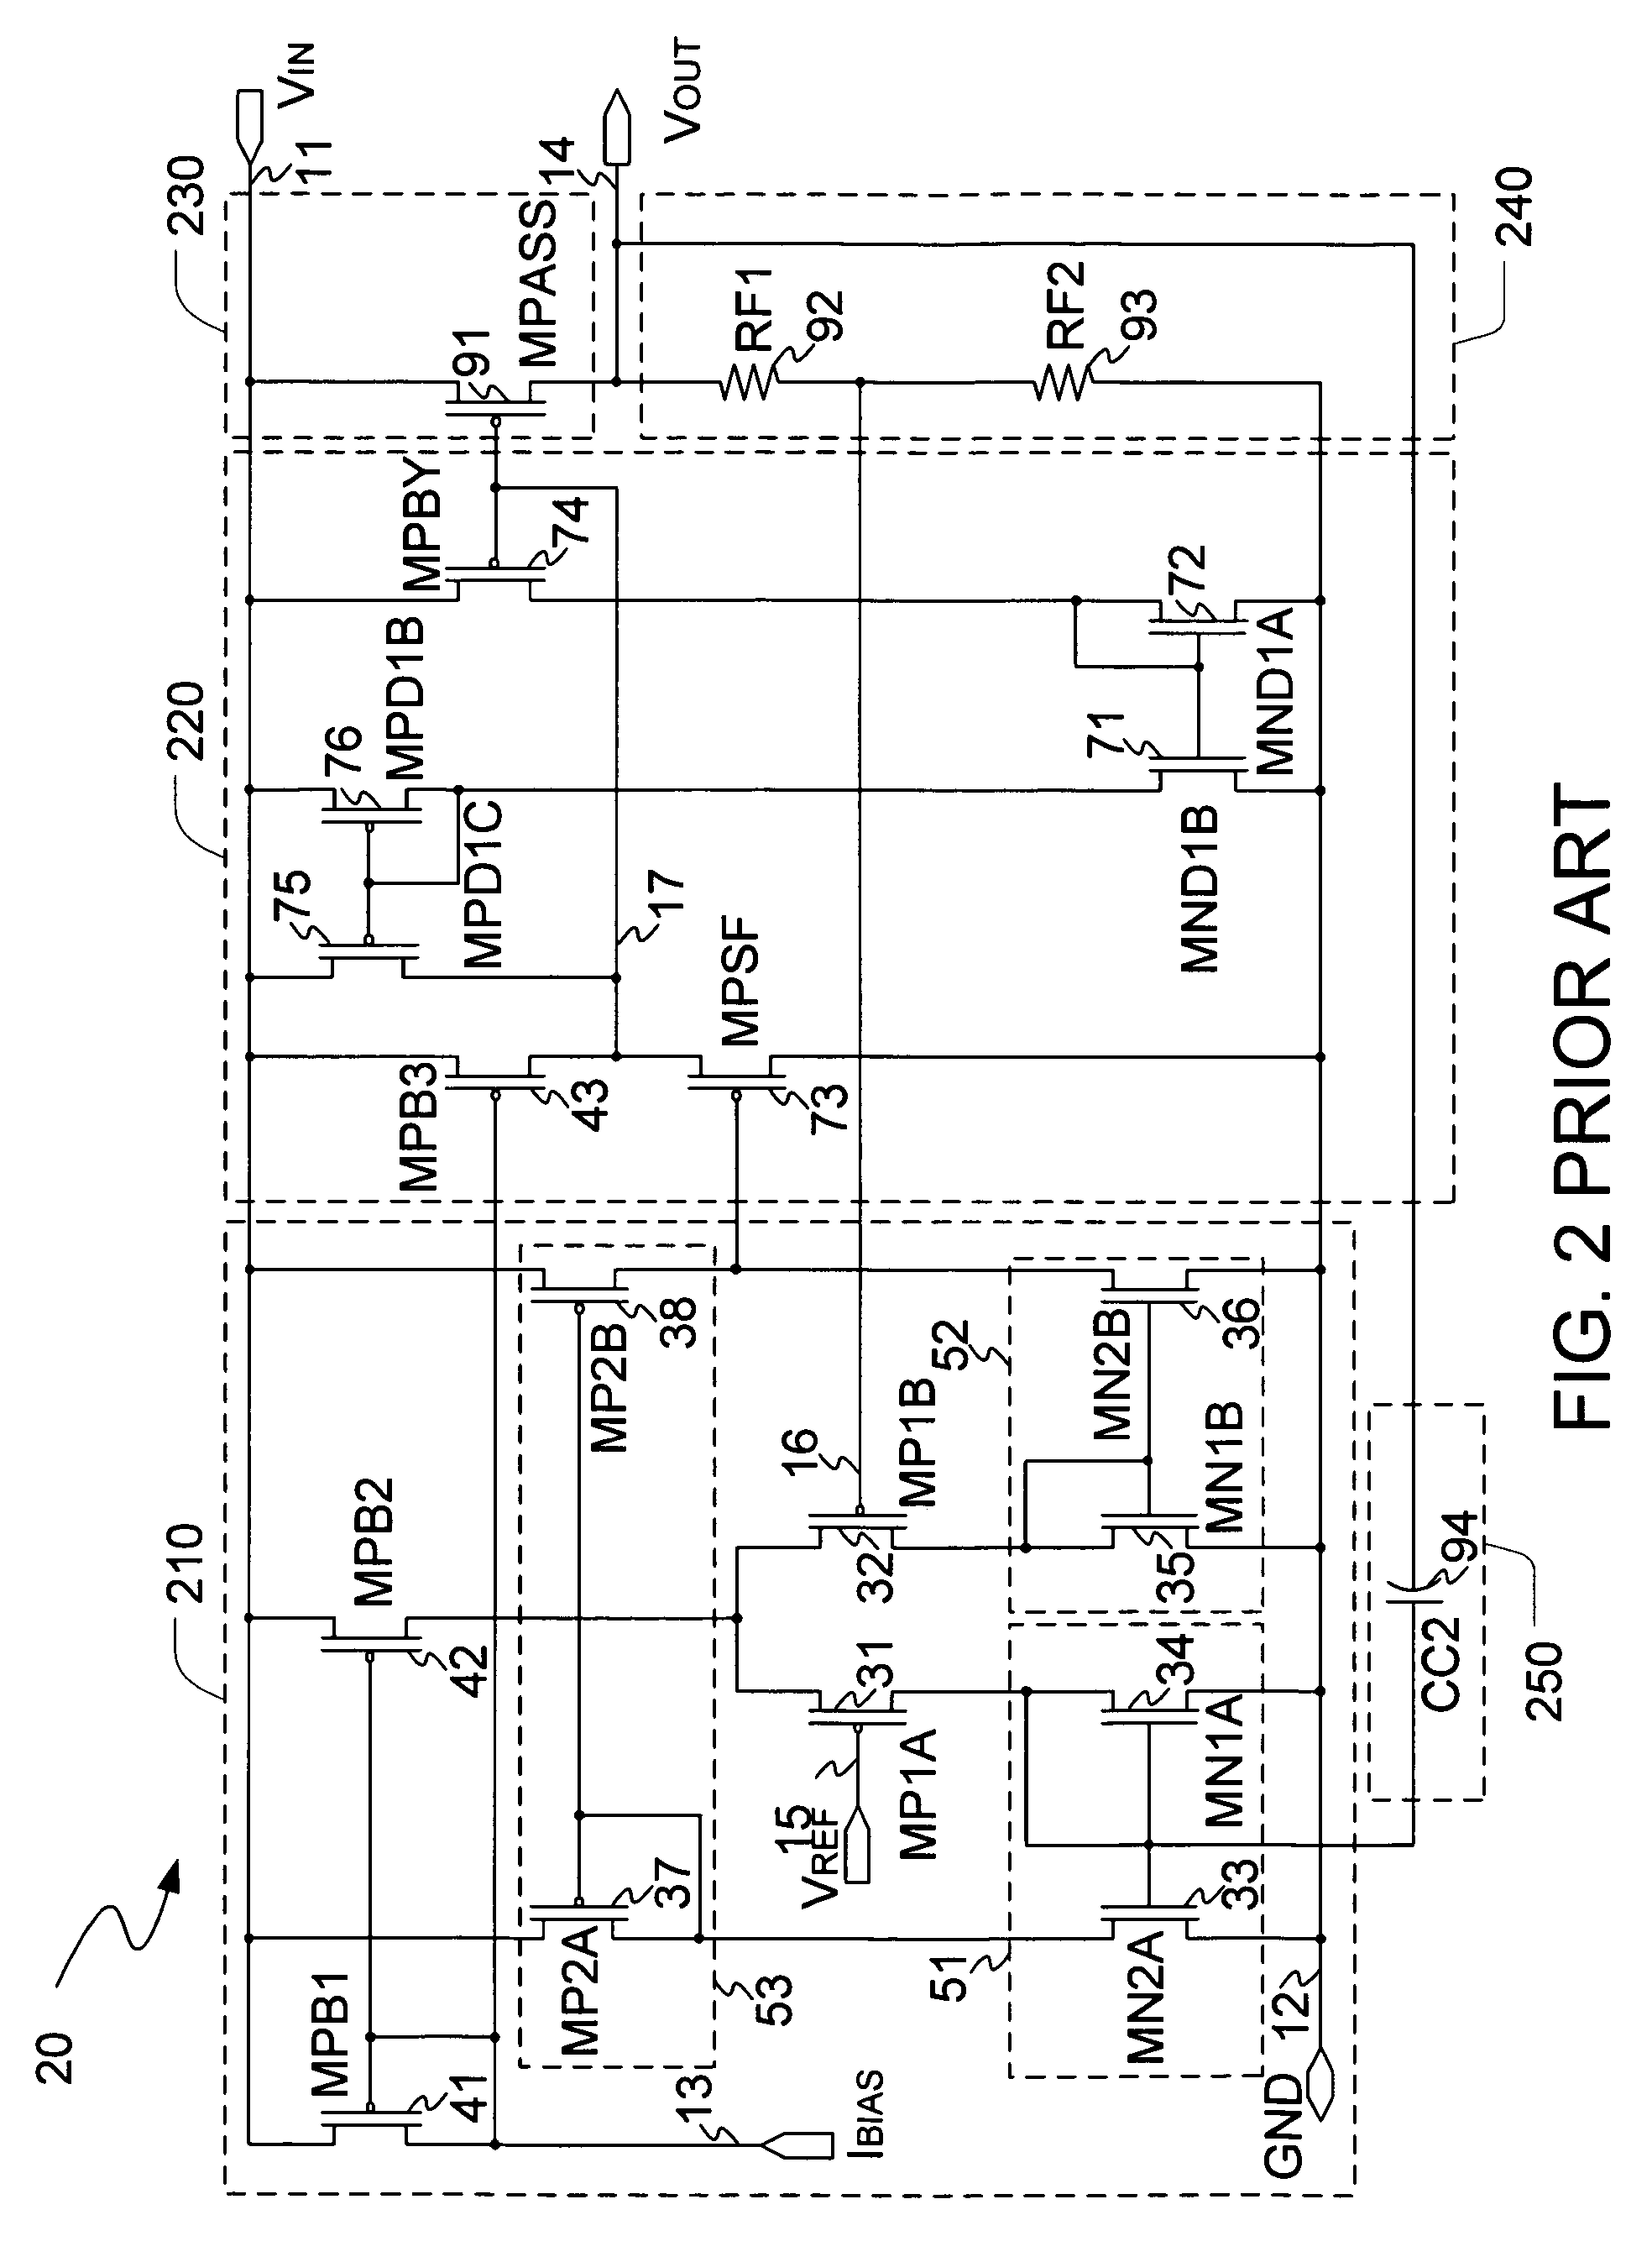 Low drop-out voltage regulator with enhanced frequency compensation